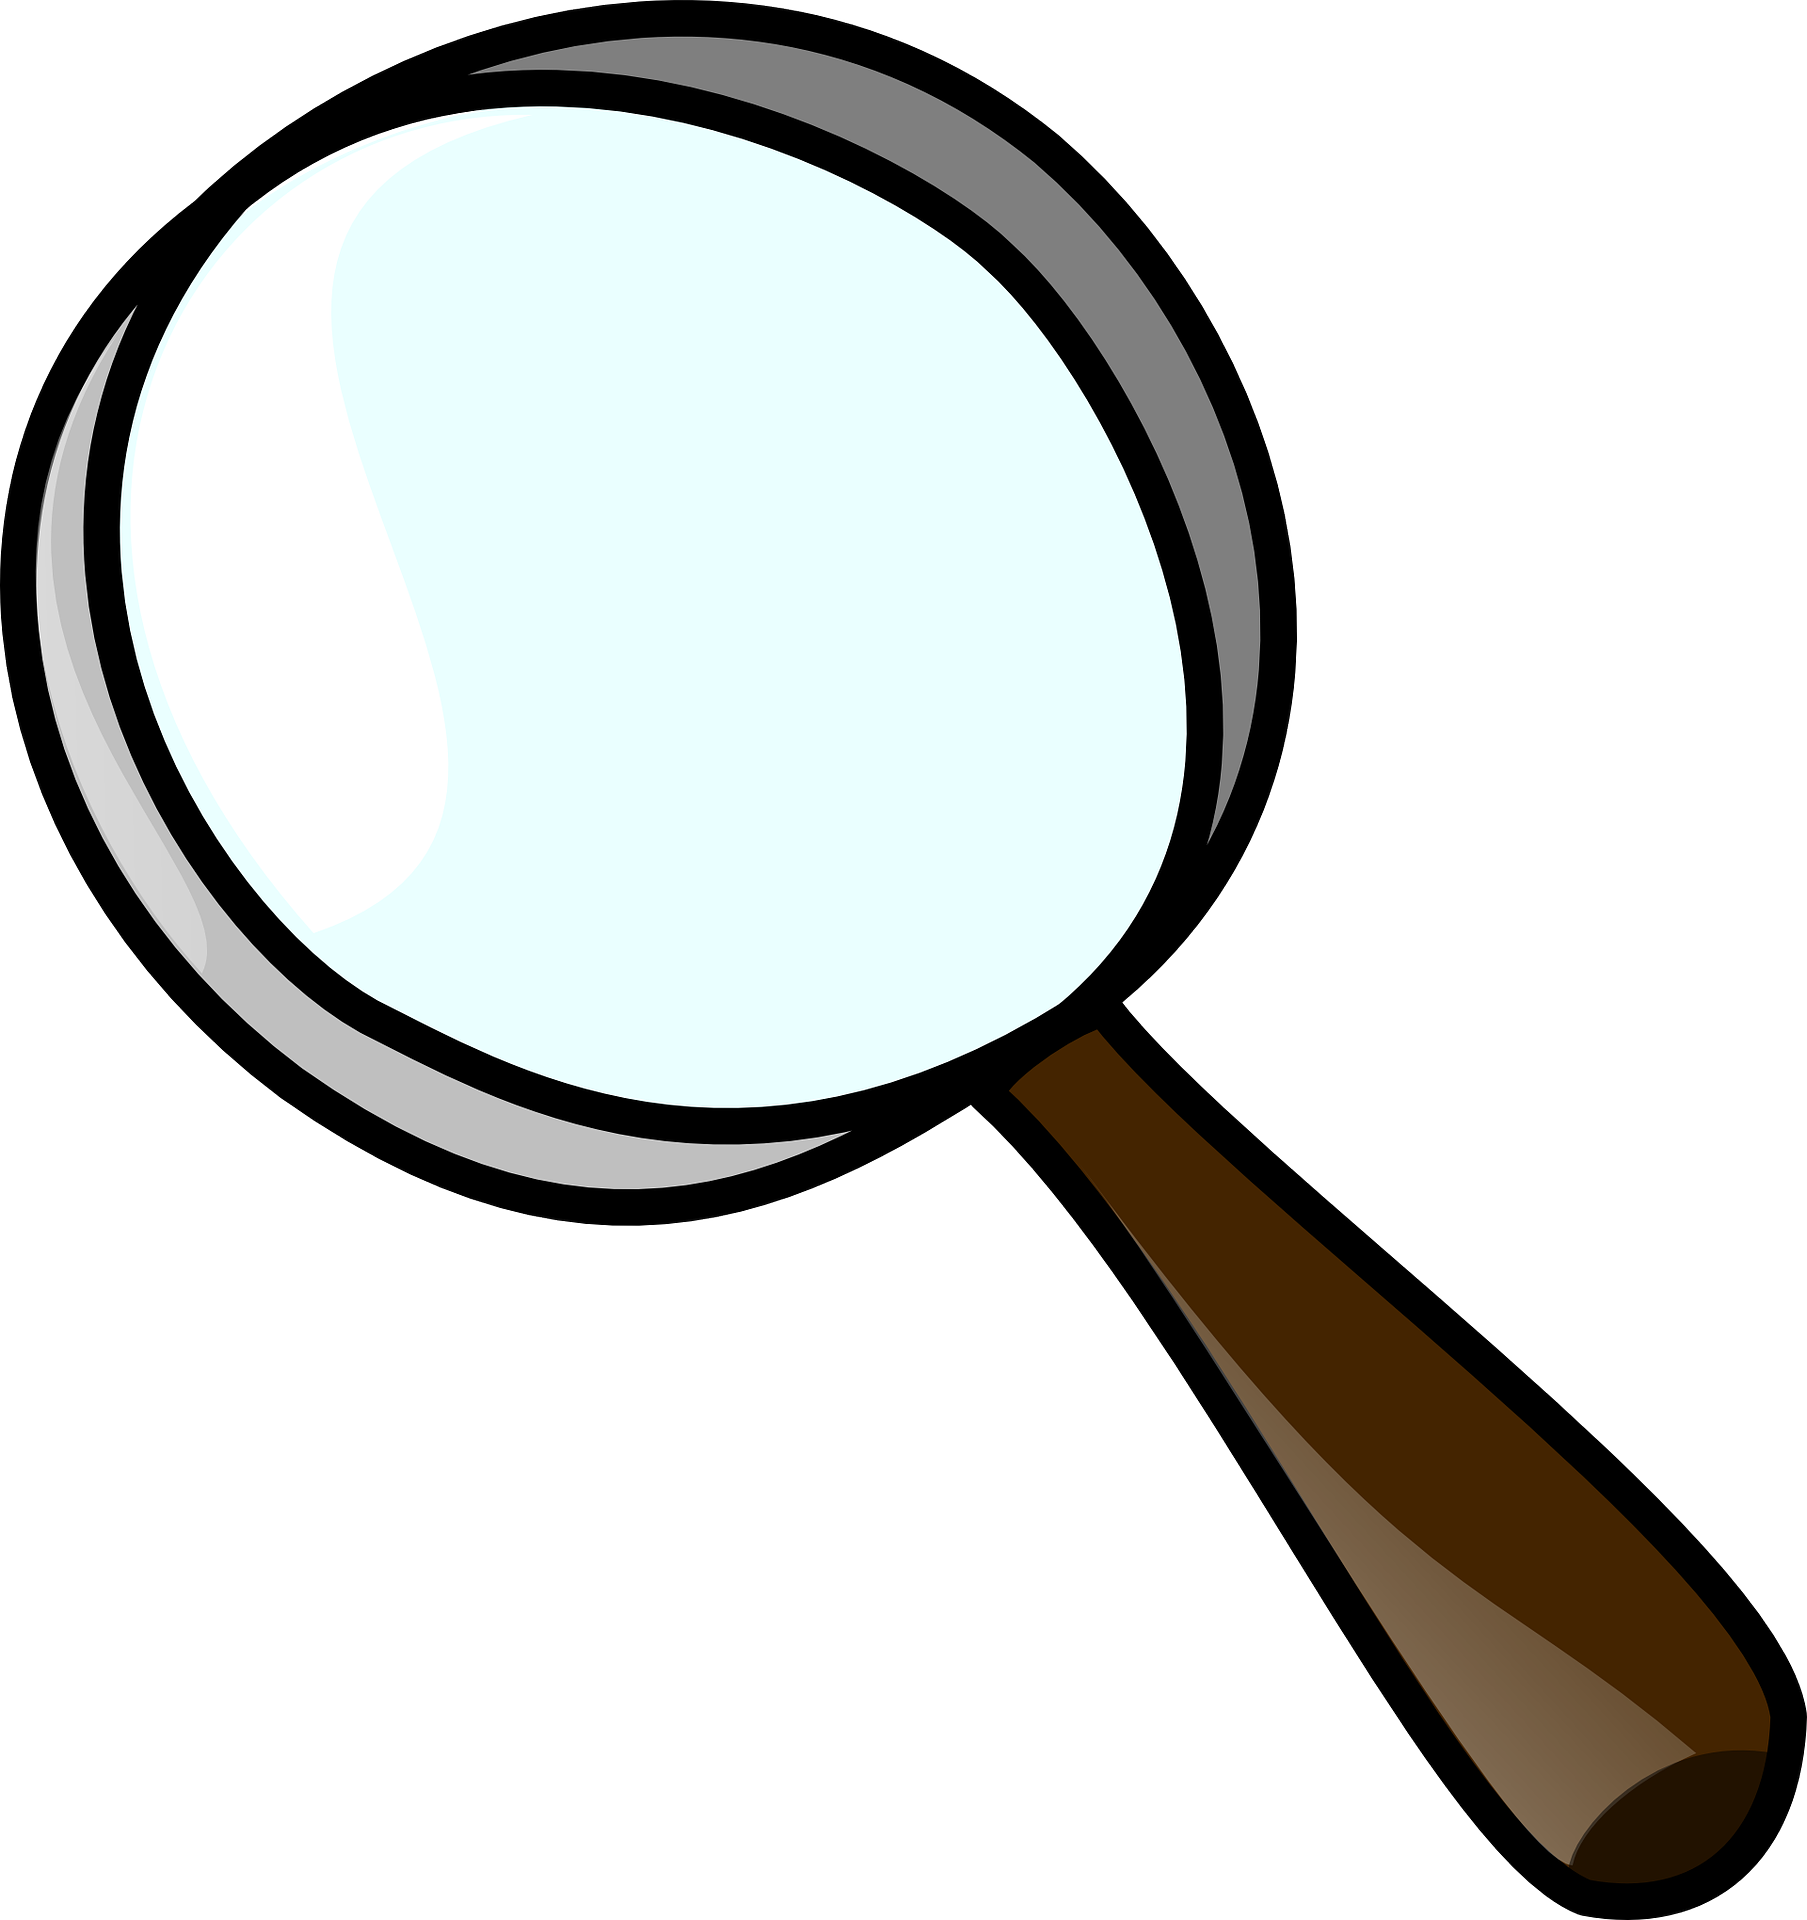 Detective Clipart Magnifying Lens Detective Magnifying